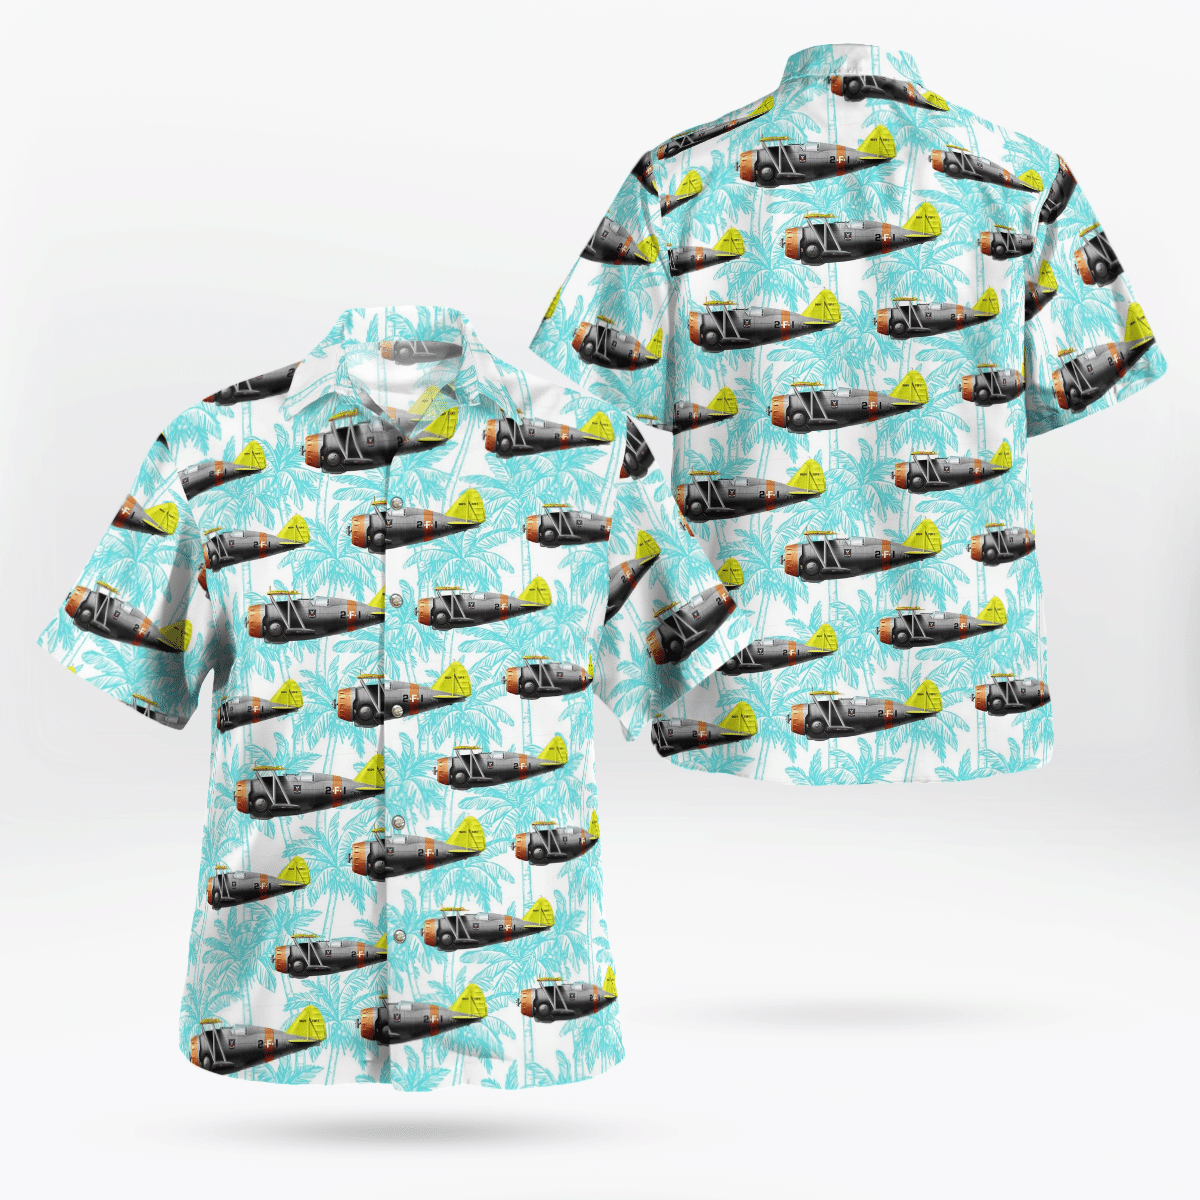 If you want to be noticed, wear These Trendy Hawaiian Shirt 103